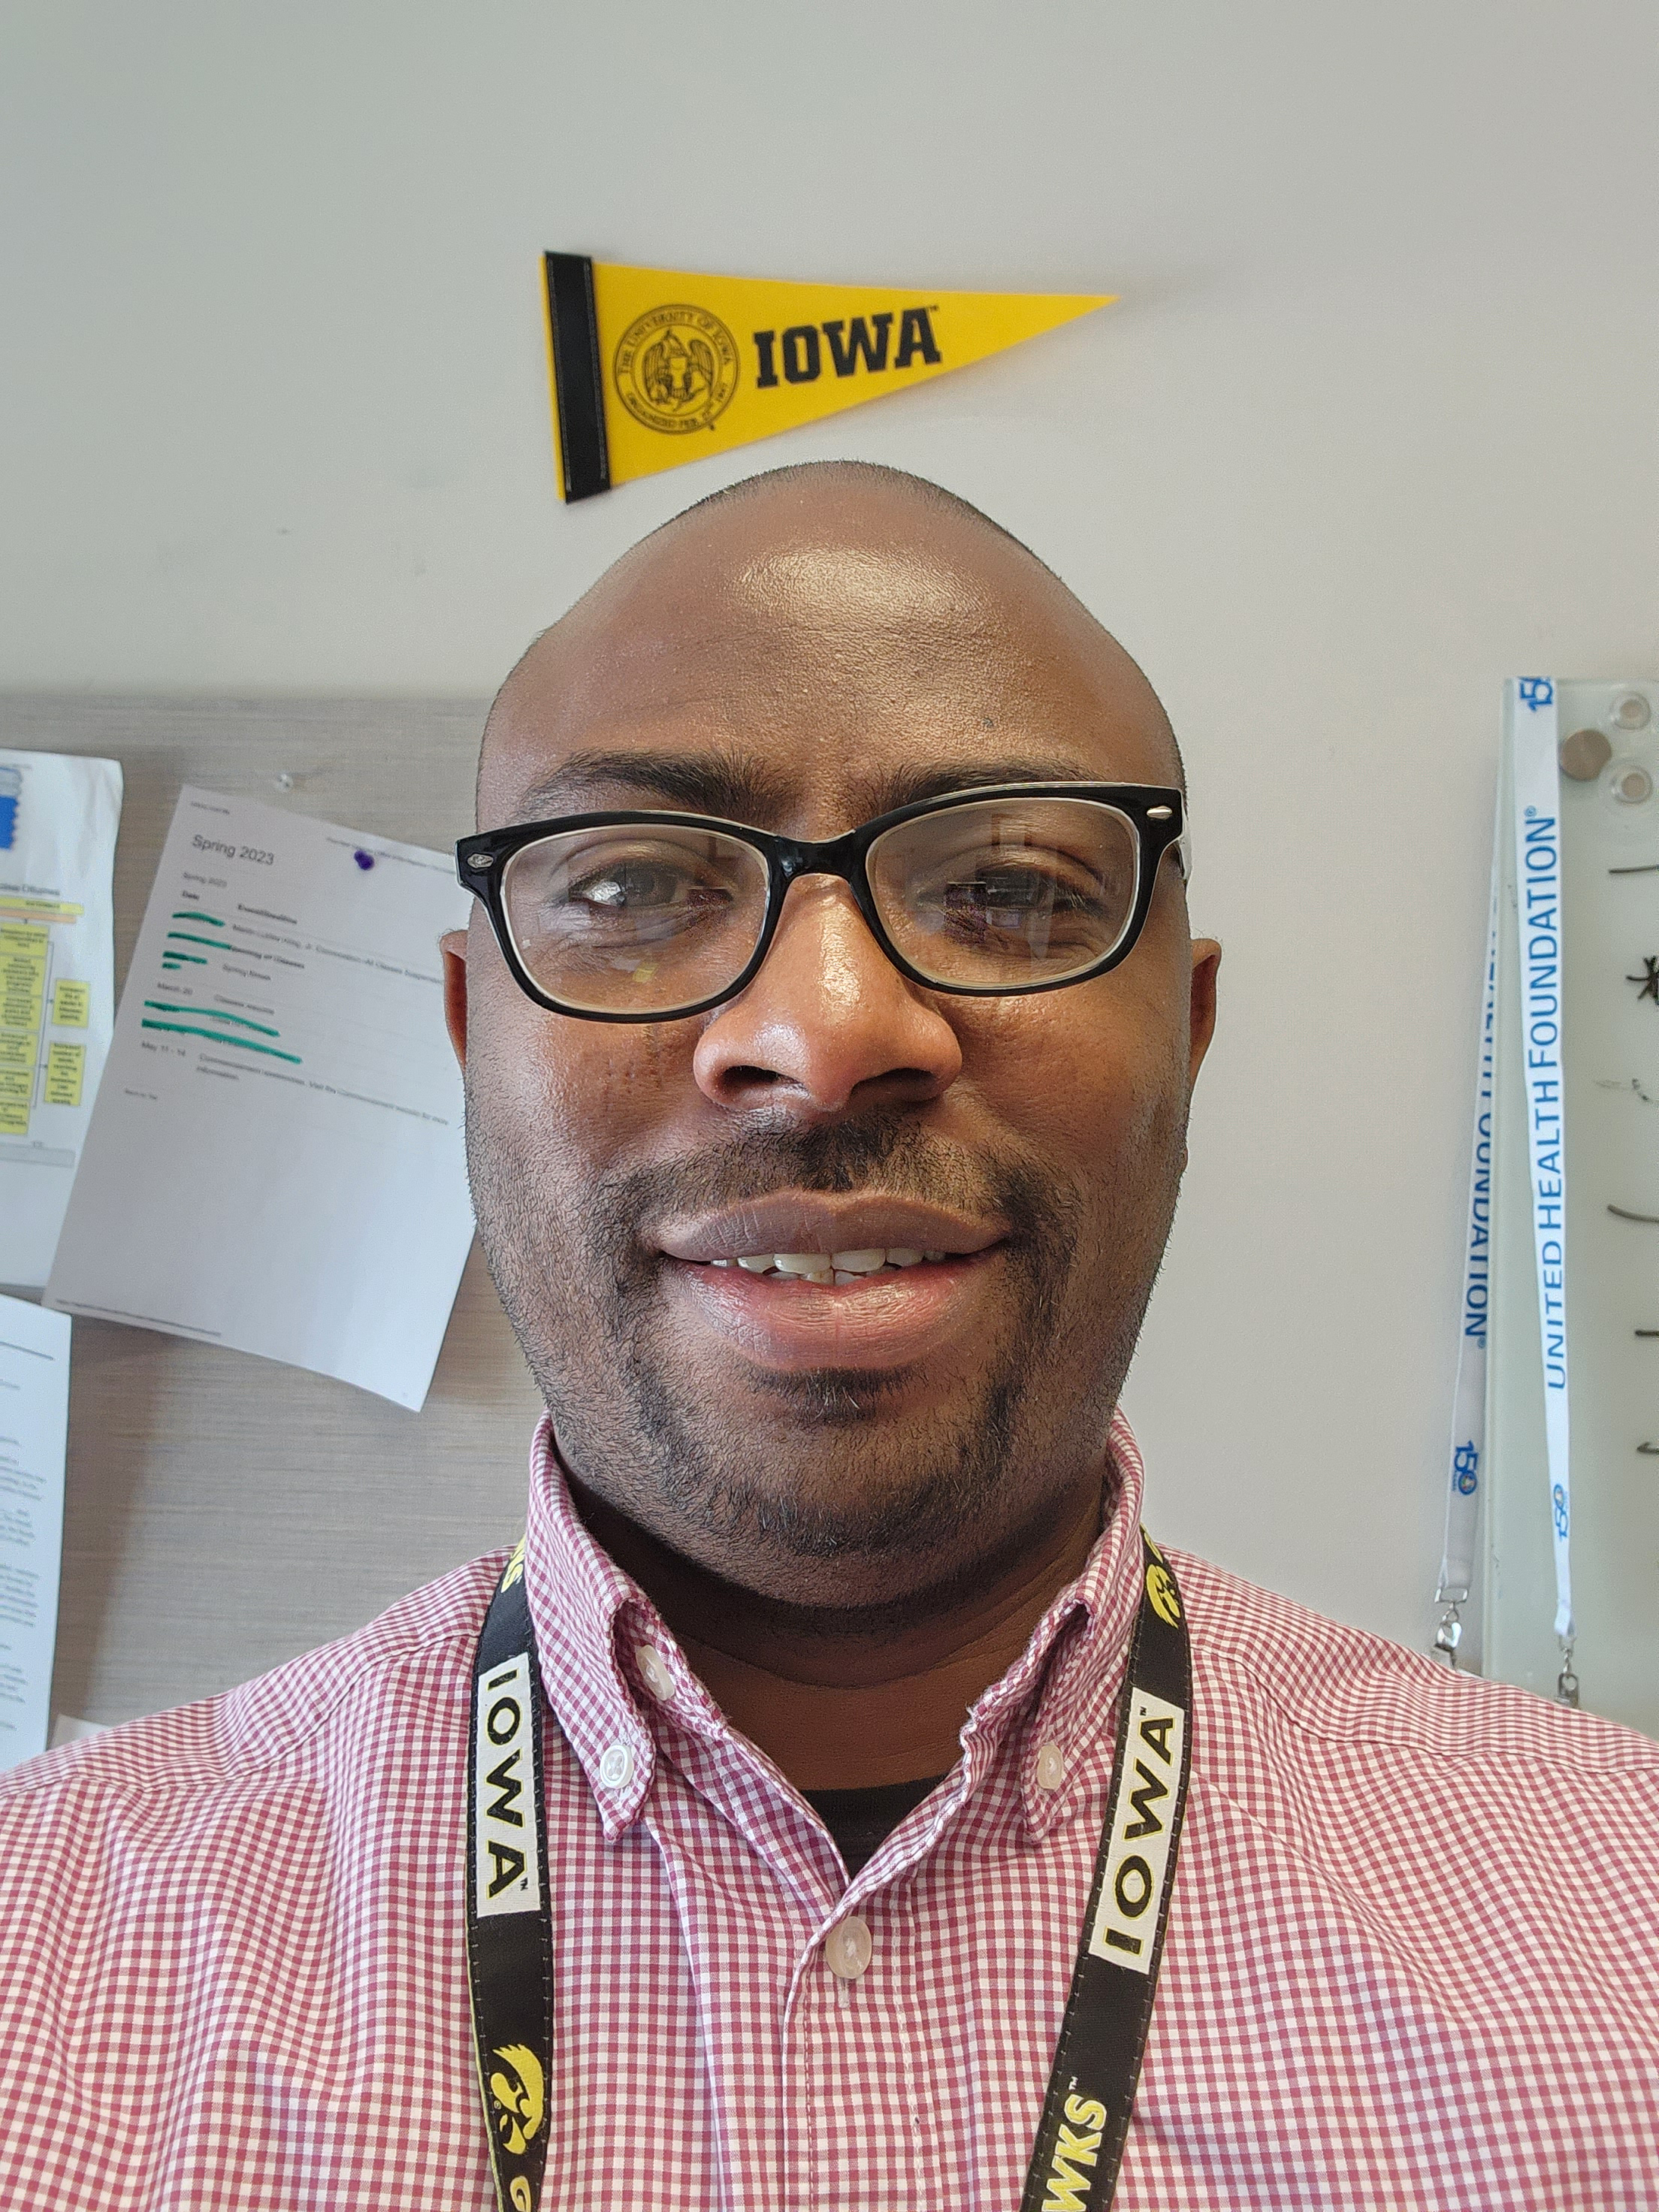 Prof. Oluwafemi Adeagbo of the Department of Community and Behavioral Health at the University of Iowa College of Public Health.